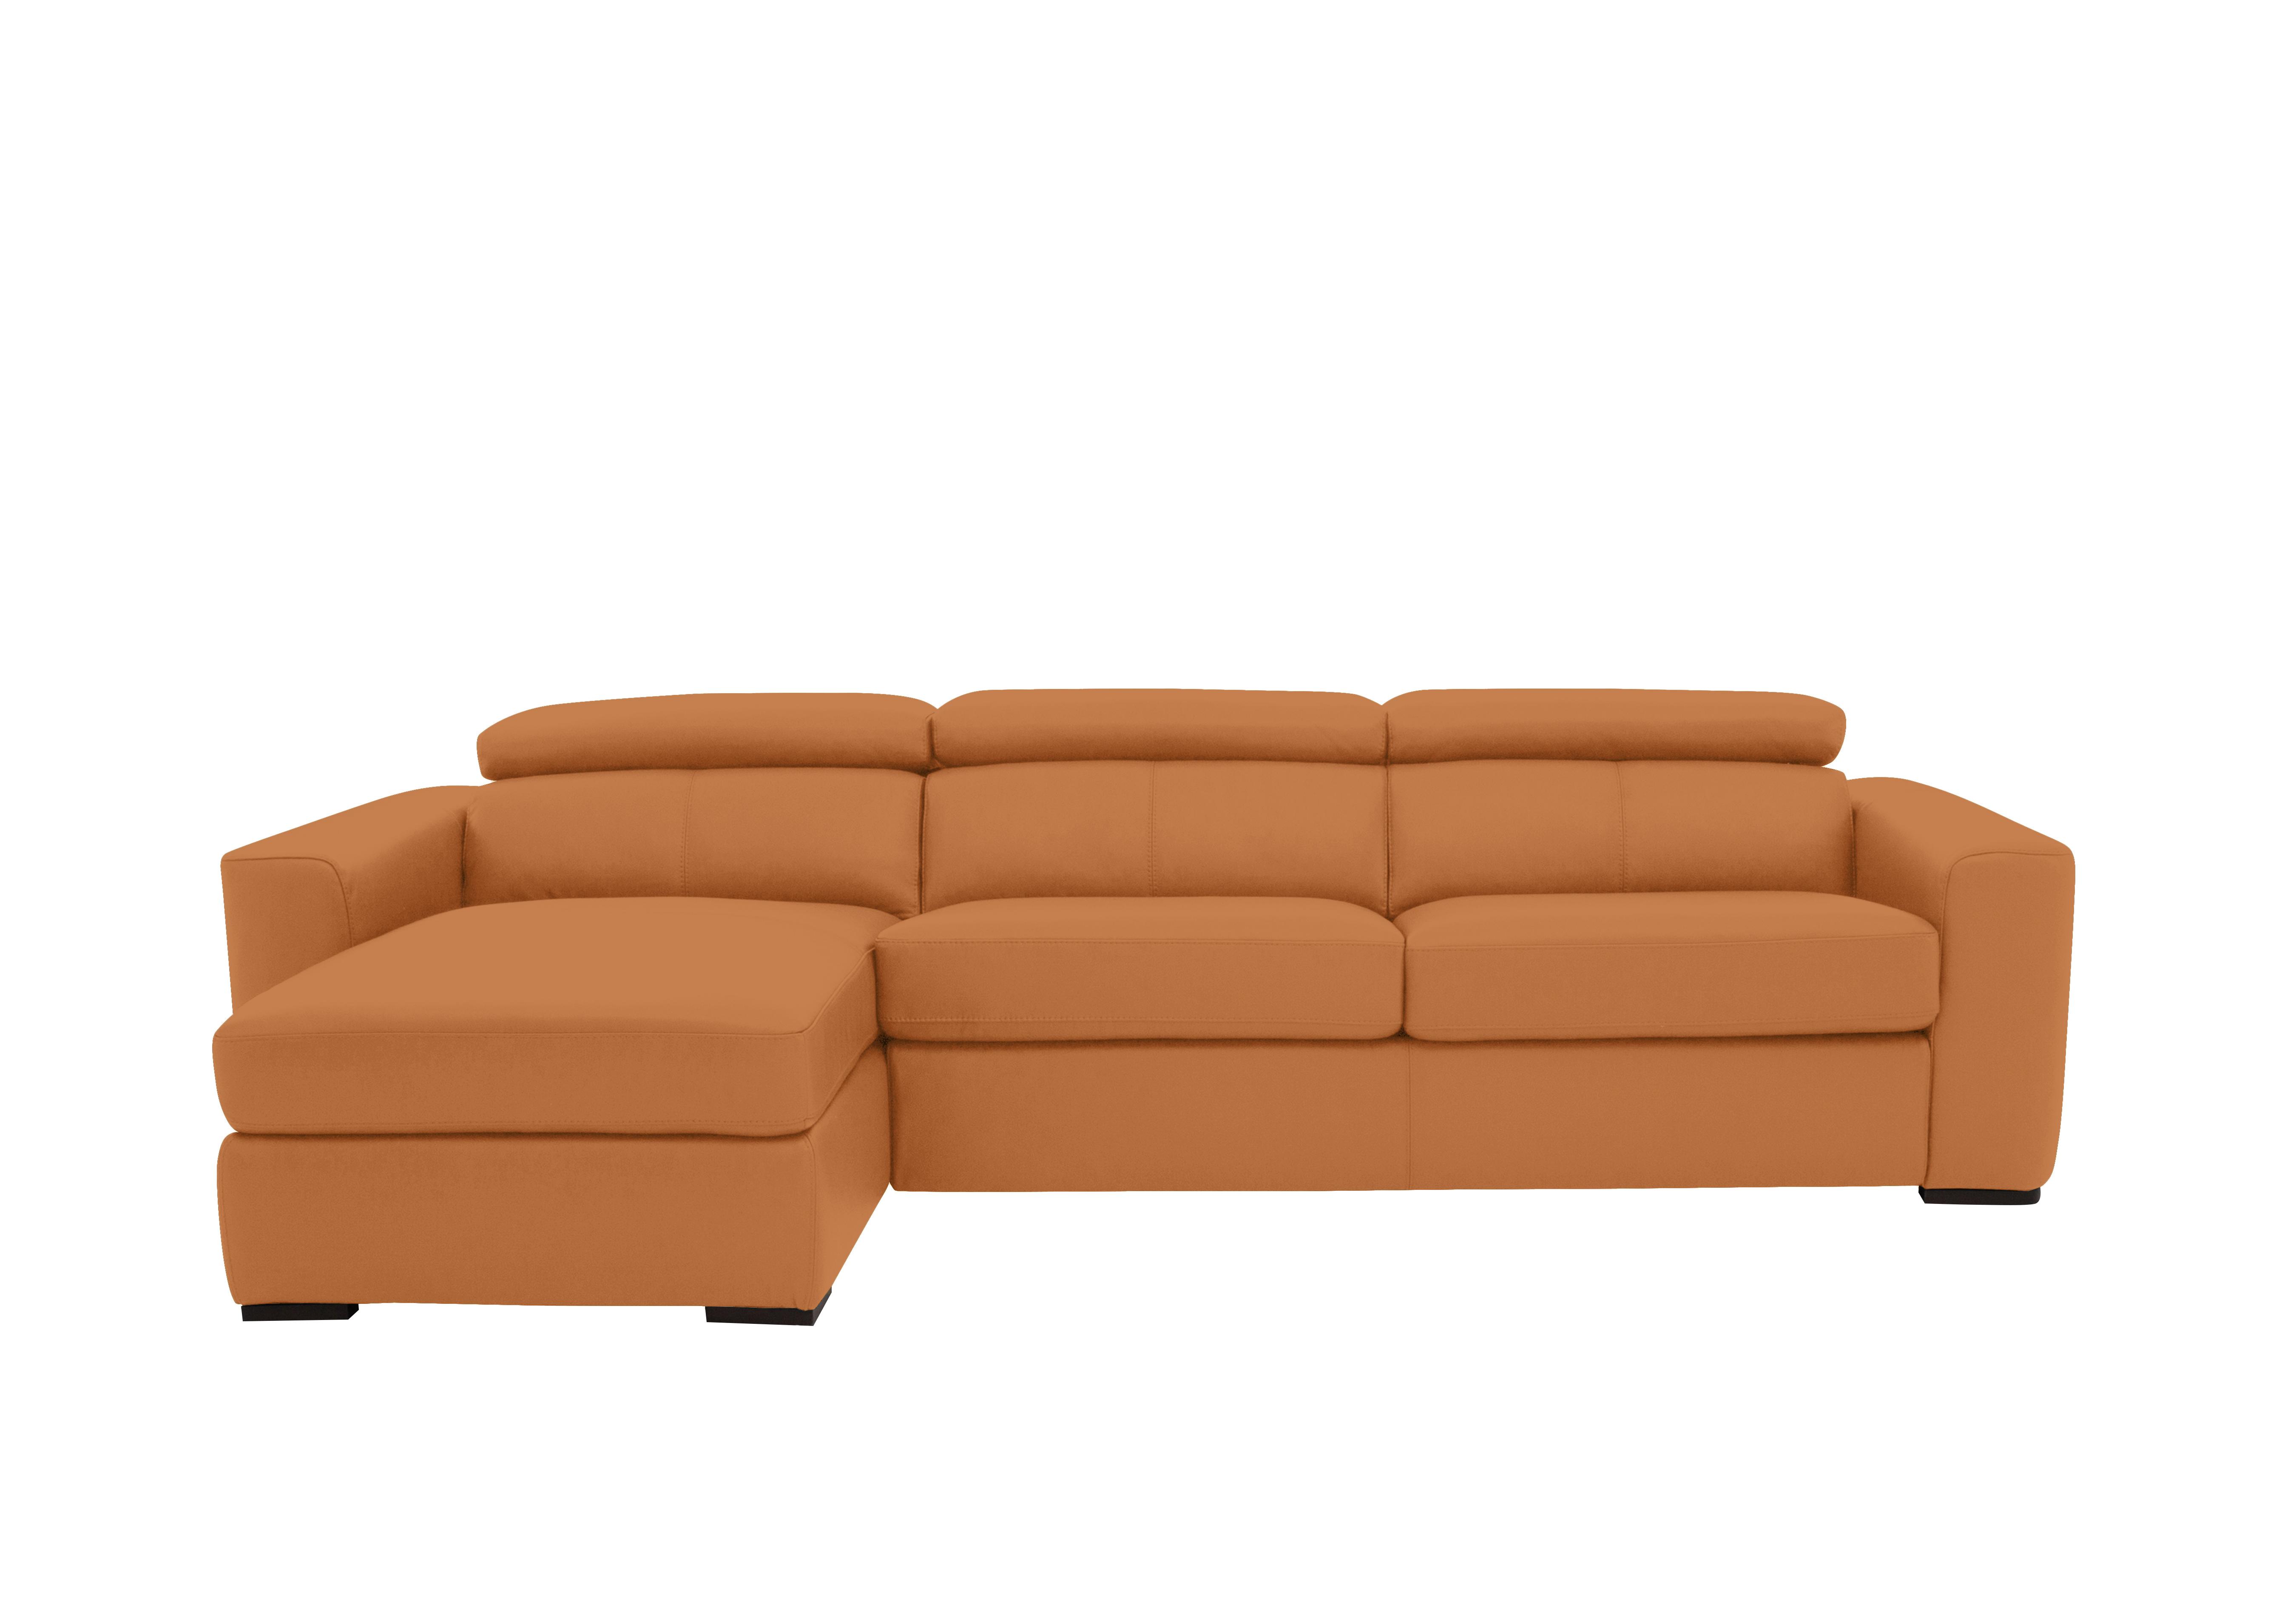 Infinity Leather Corner Chaise Sofa with Storage in Bv-335e Honey Yellow on Furniture Village